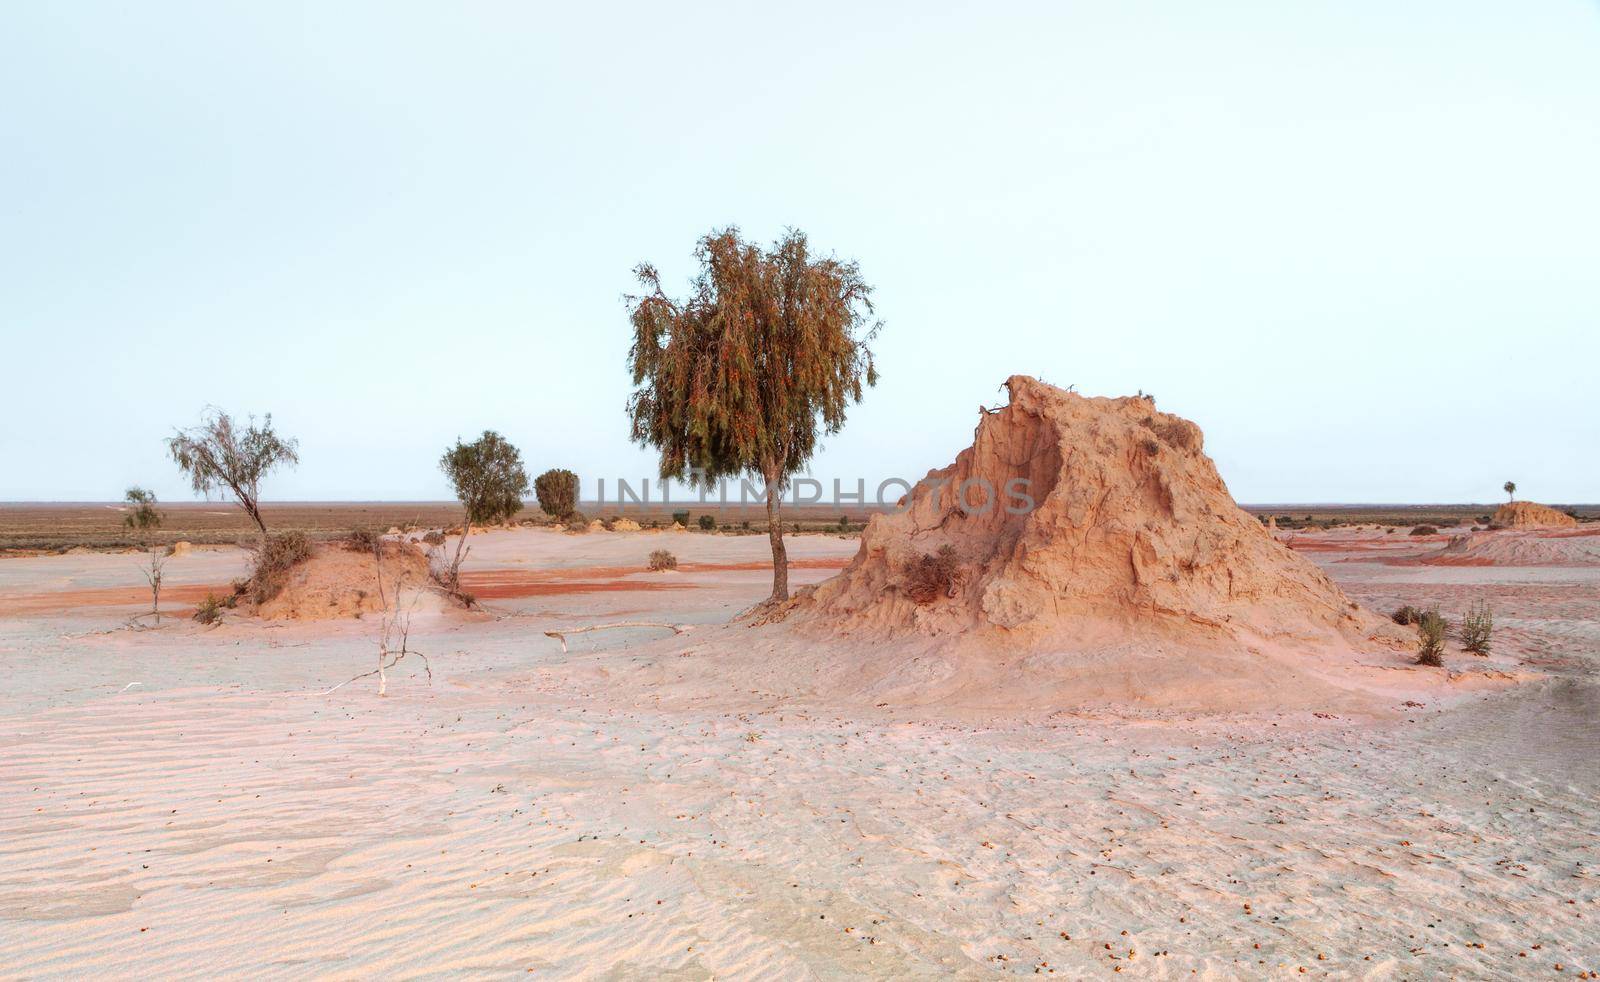 Mounds in the Australian desert support the only trees around by lovleah